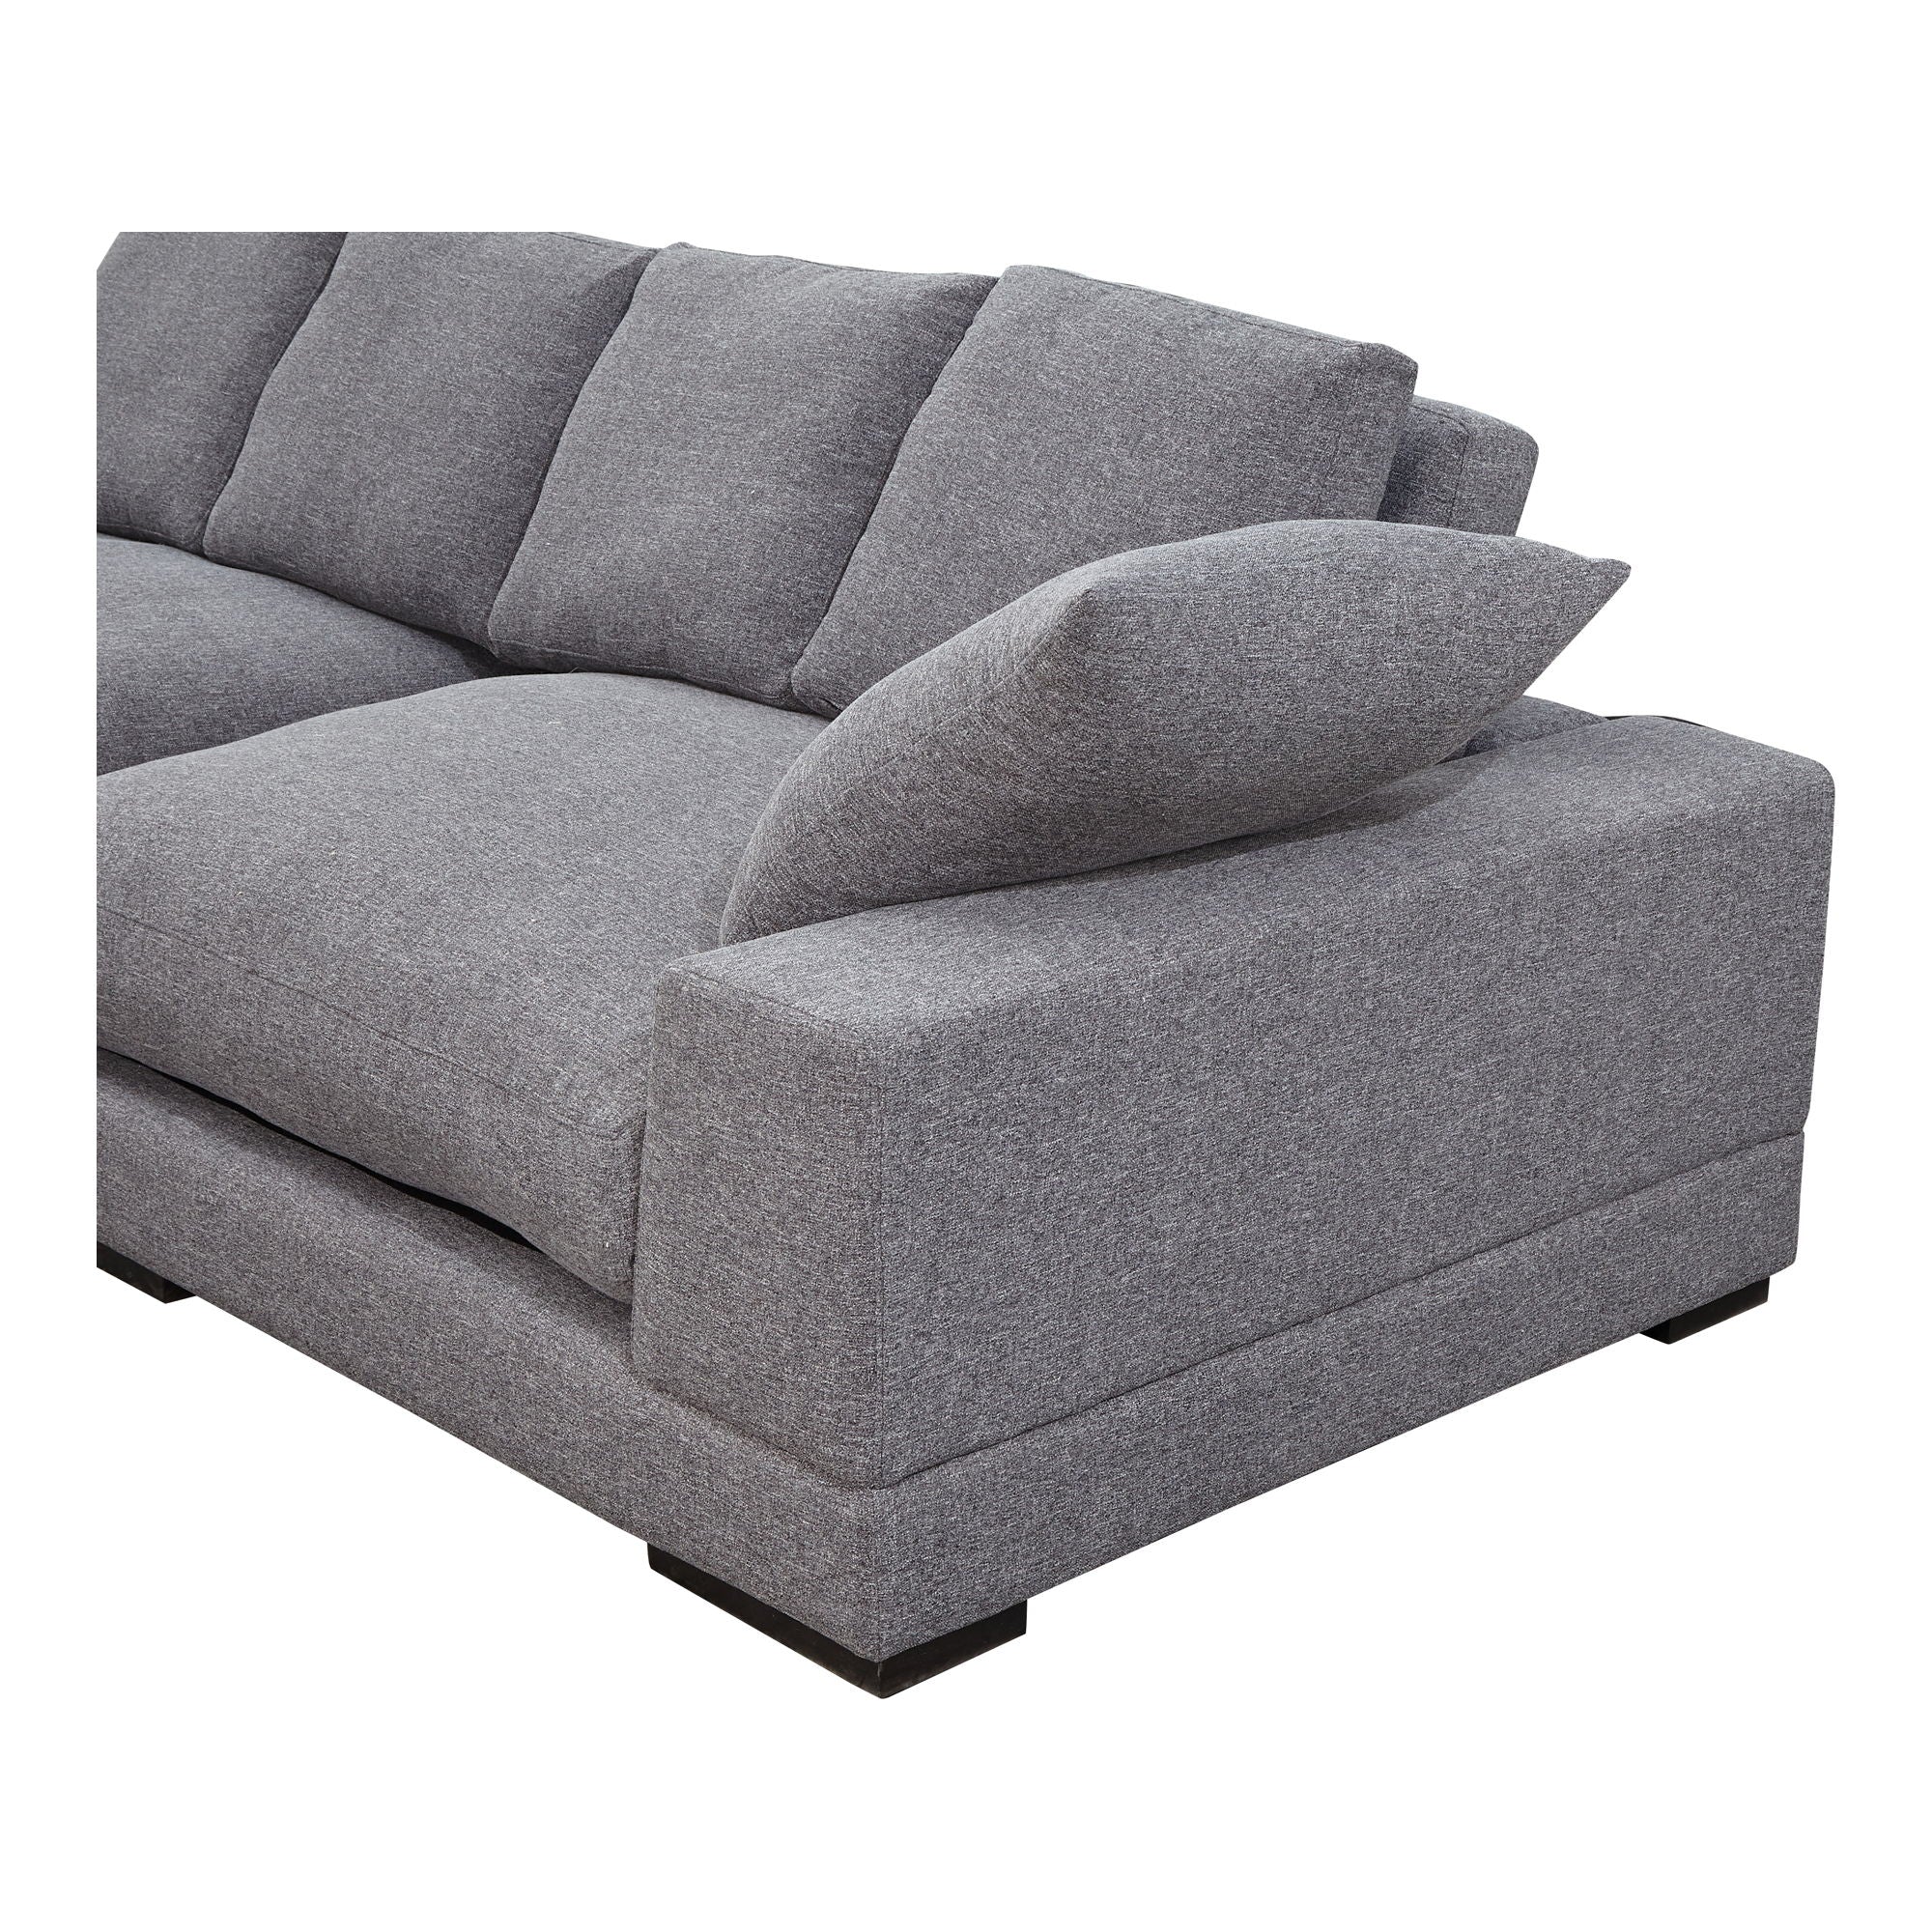 Plunge - Sectional - Grey - Fabric